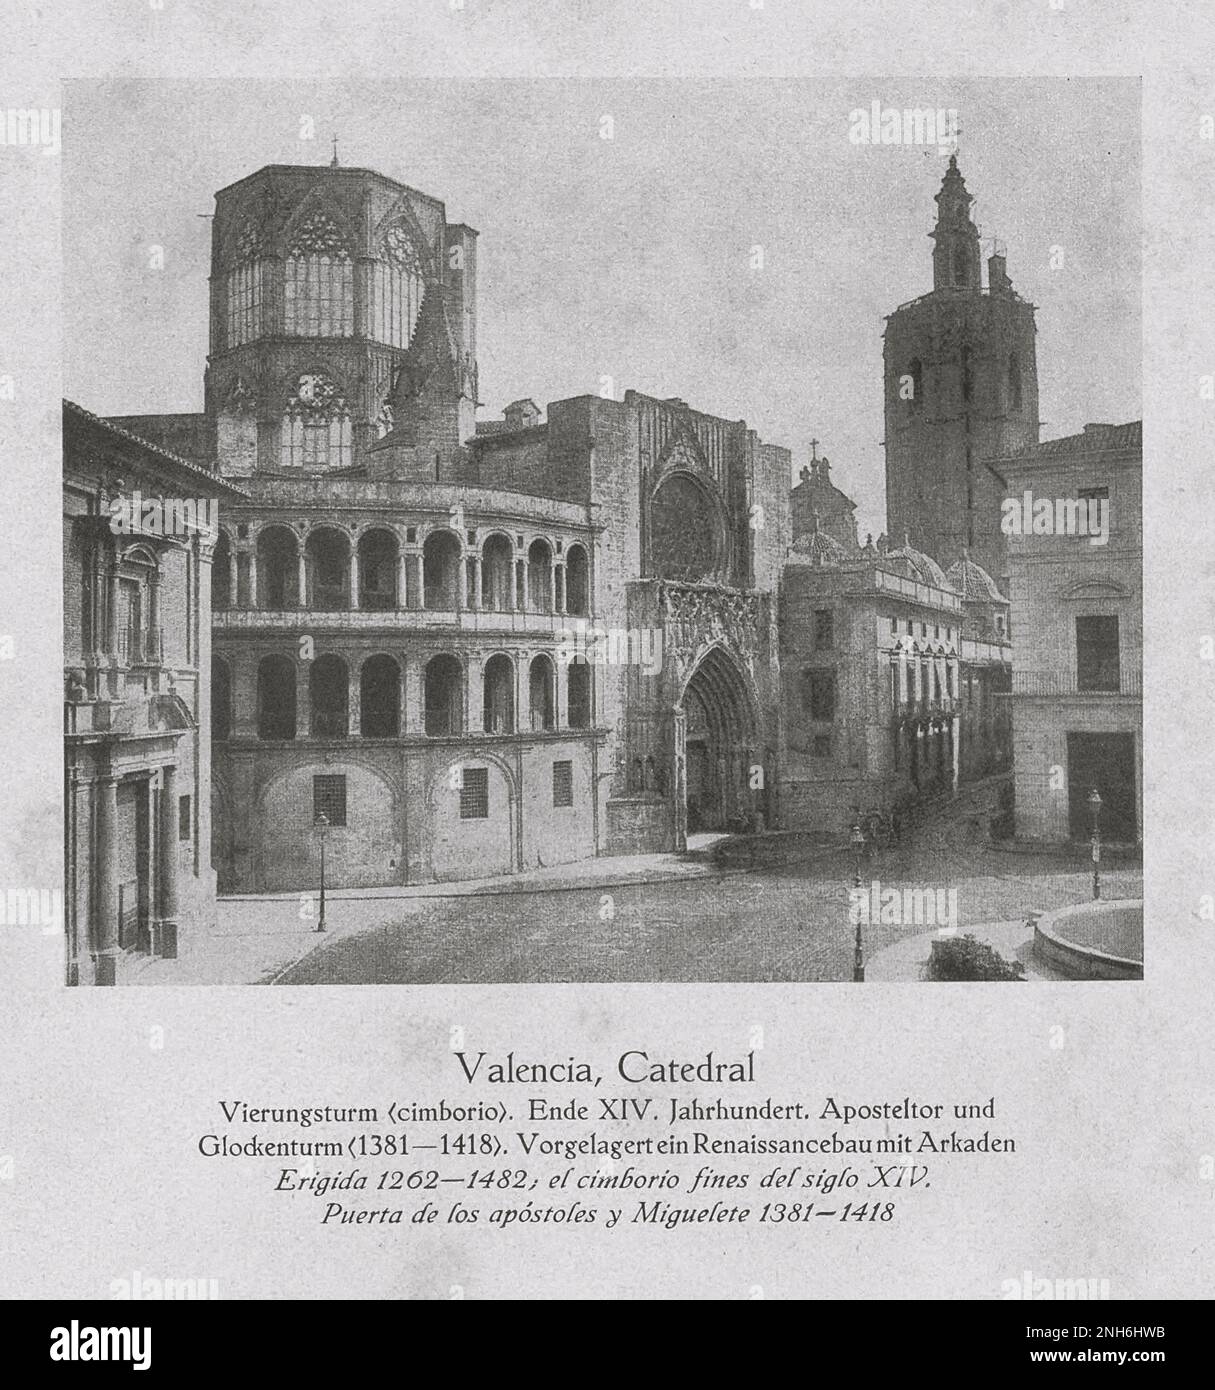 Architecture of Old Spain. Vintage photo of Valencia Cathedral. Ciborium. End of 14th century. Apostle's Gate and Bell Tower (1381-1418). In front of a Renaissance building with arcades Stock Photo